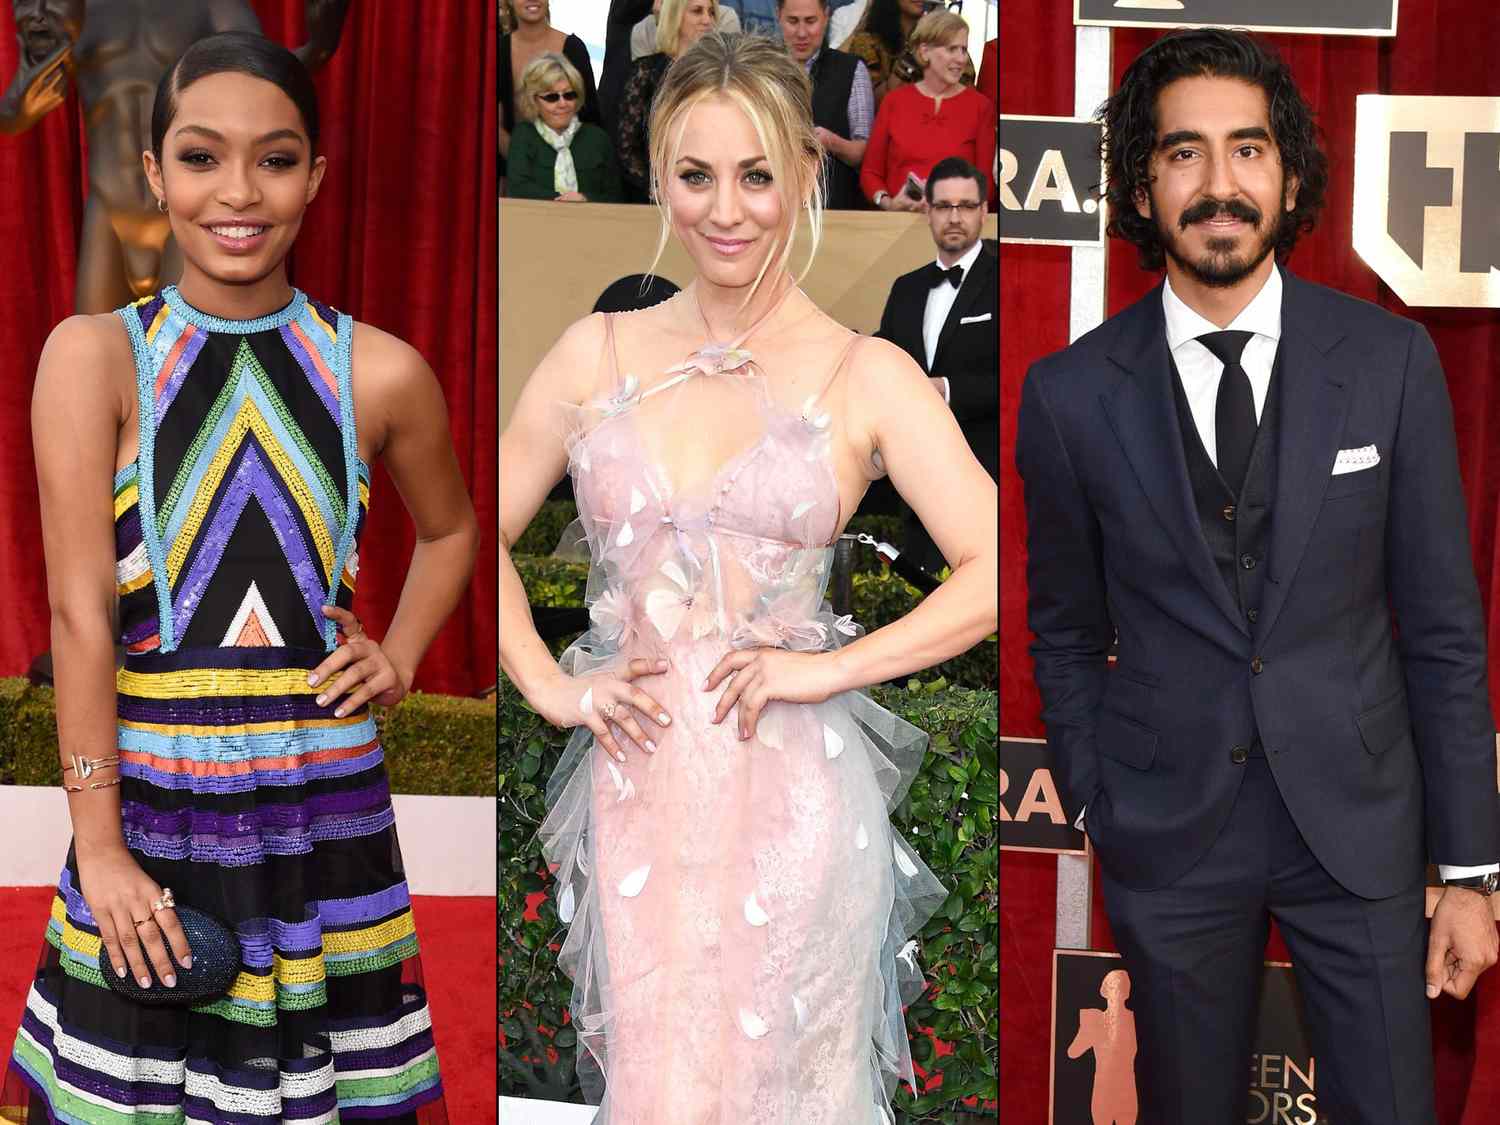 The Best and Worst Fashion of the 2017 SAG Awards